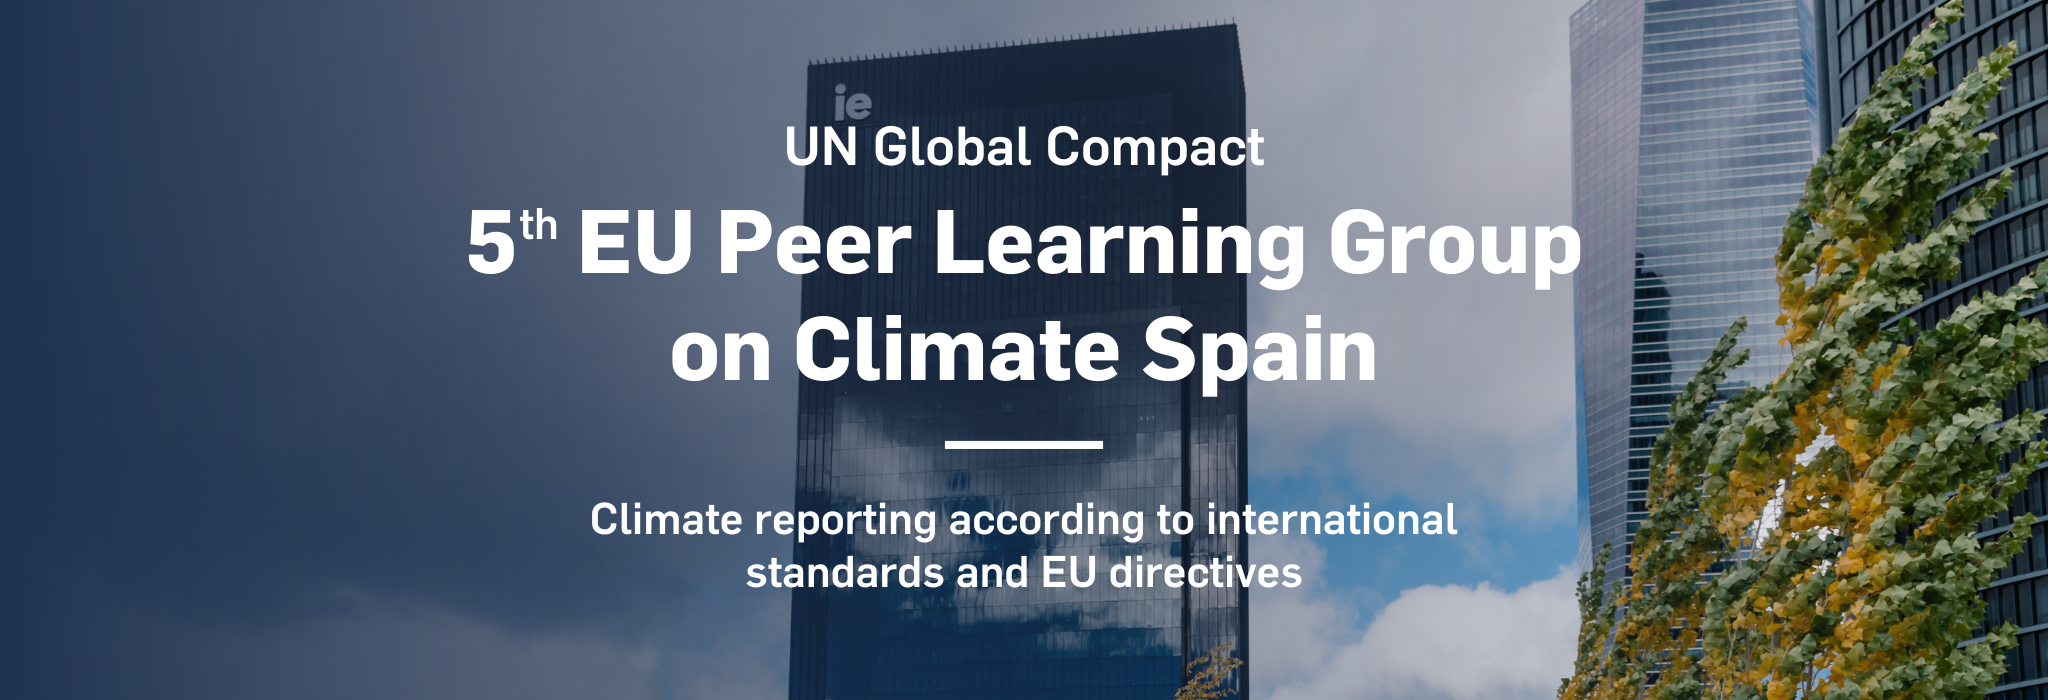 EU Peer Learning Group on Climate